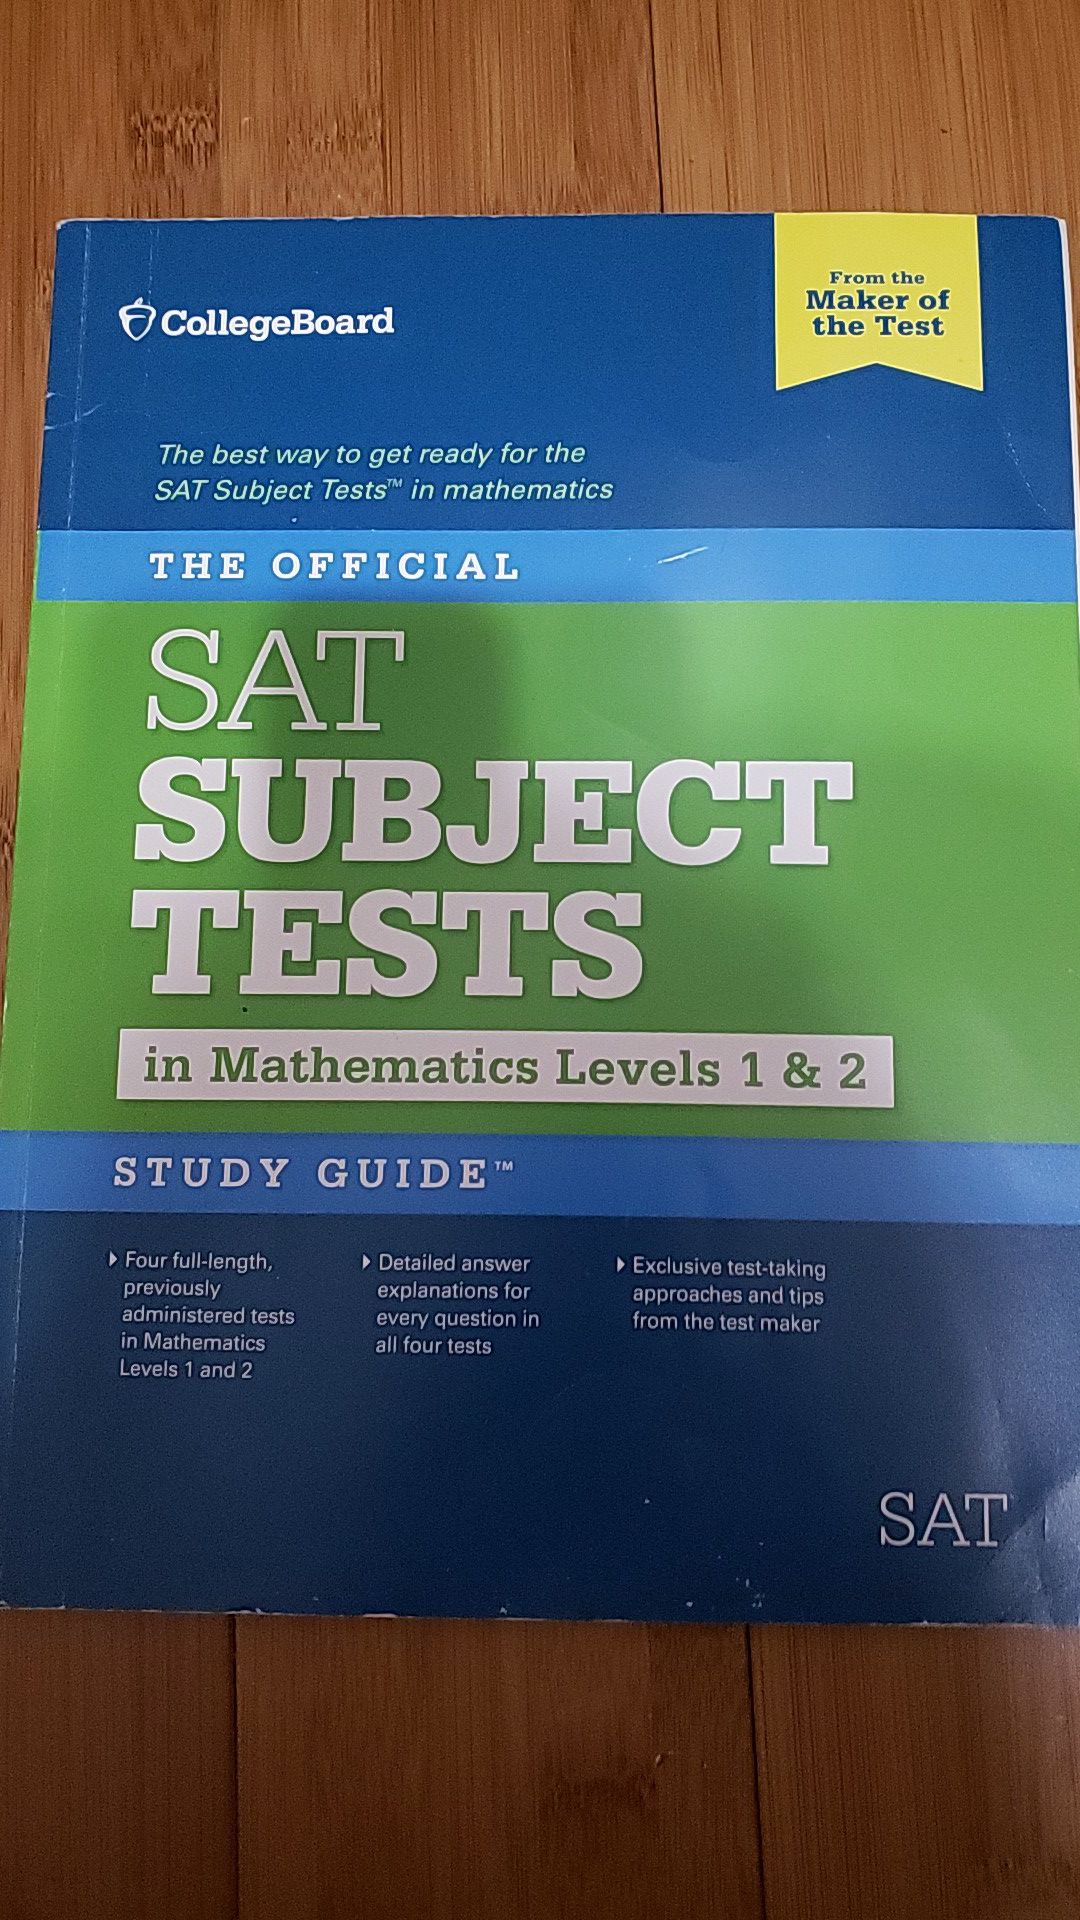 The Official SAT Subjests in Mathematics Levels 1 & 2 Study Guide